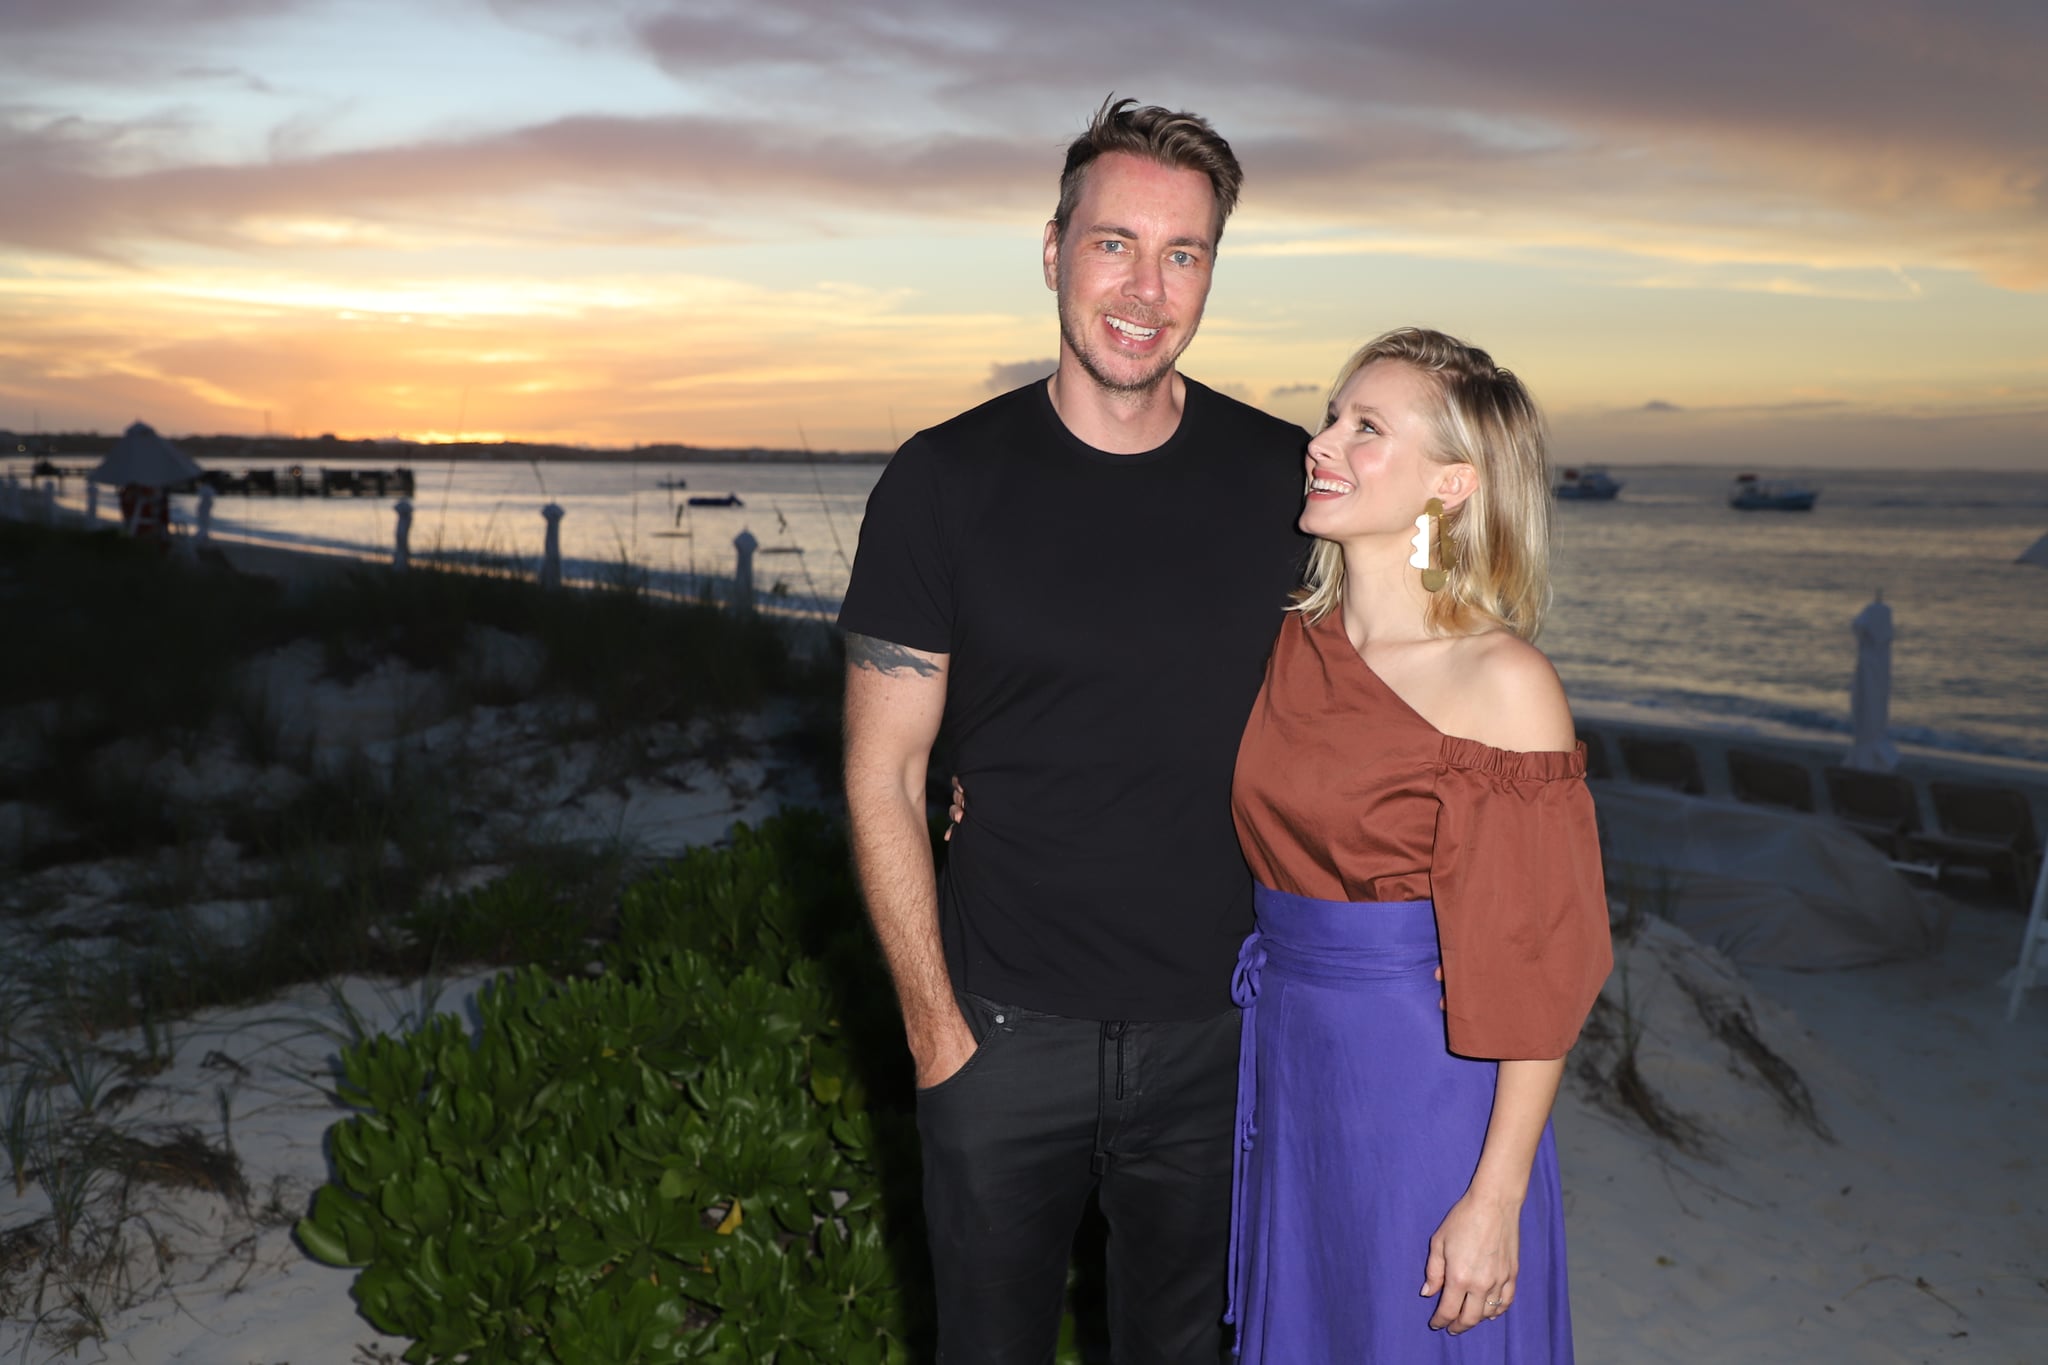 PROVIDENCIALES, PROVIDENCIALES - JANUARY 30:  Dax Shepard and Kristen Bell pose as she vacations with her family at Beaches Turks & Caicos Resort Villages & Spa on January 30, 2018 in Providenciales, Turks & Caicos.  (Photo by John Parra/Getty Images for Beaches)